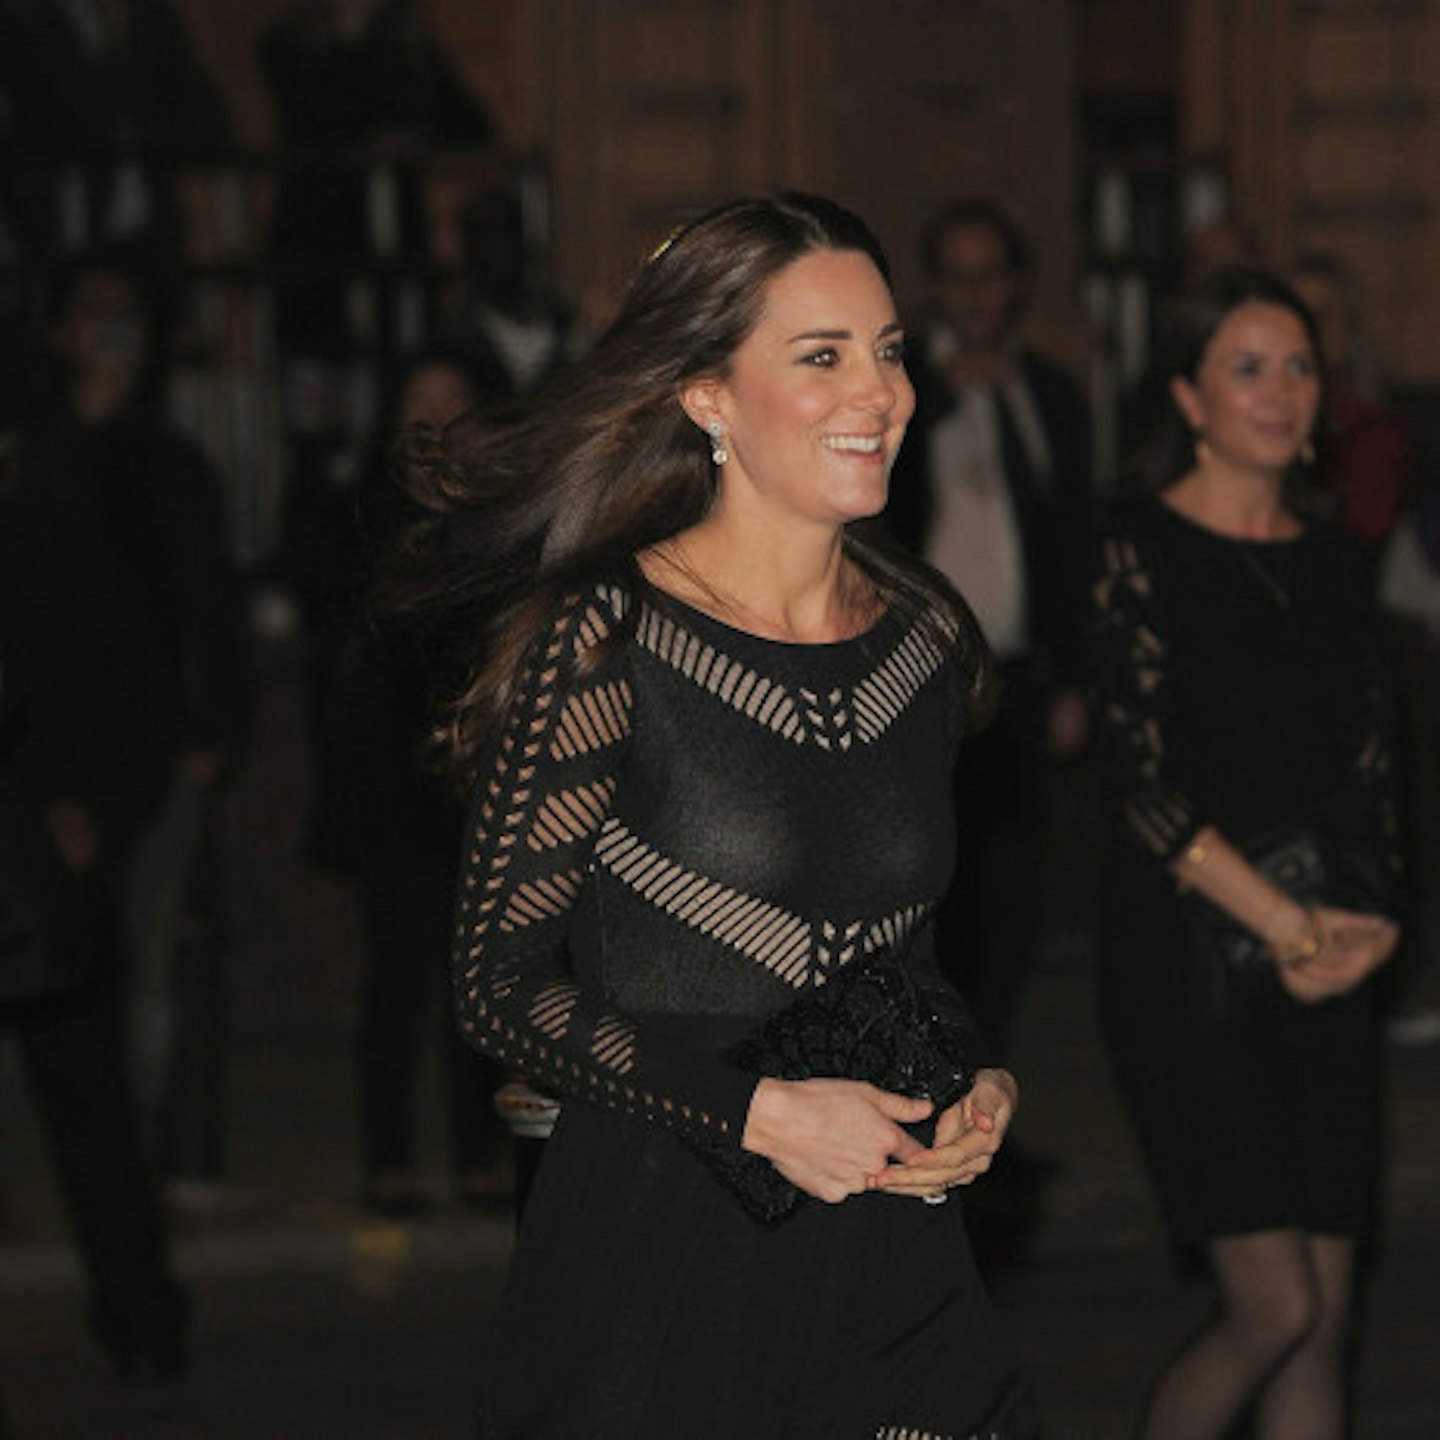 Kate showed off her tiny baby bump on Thursday night